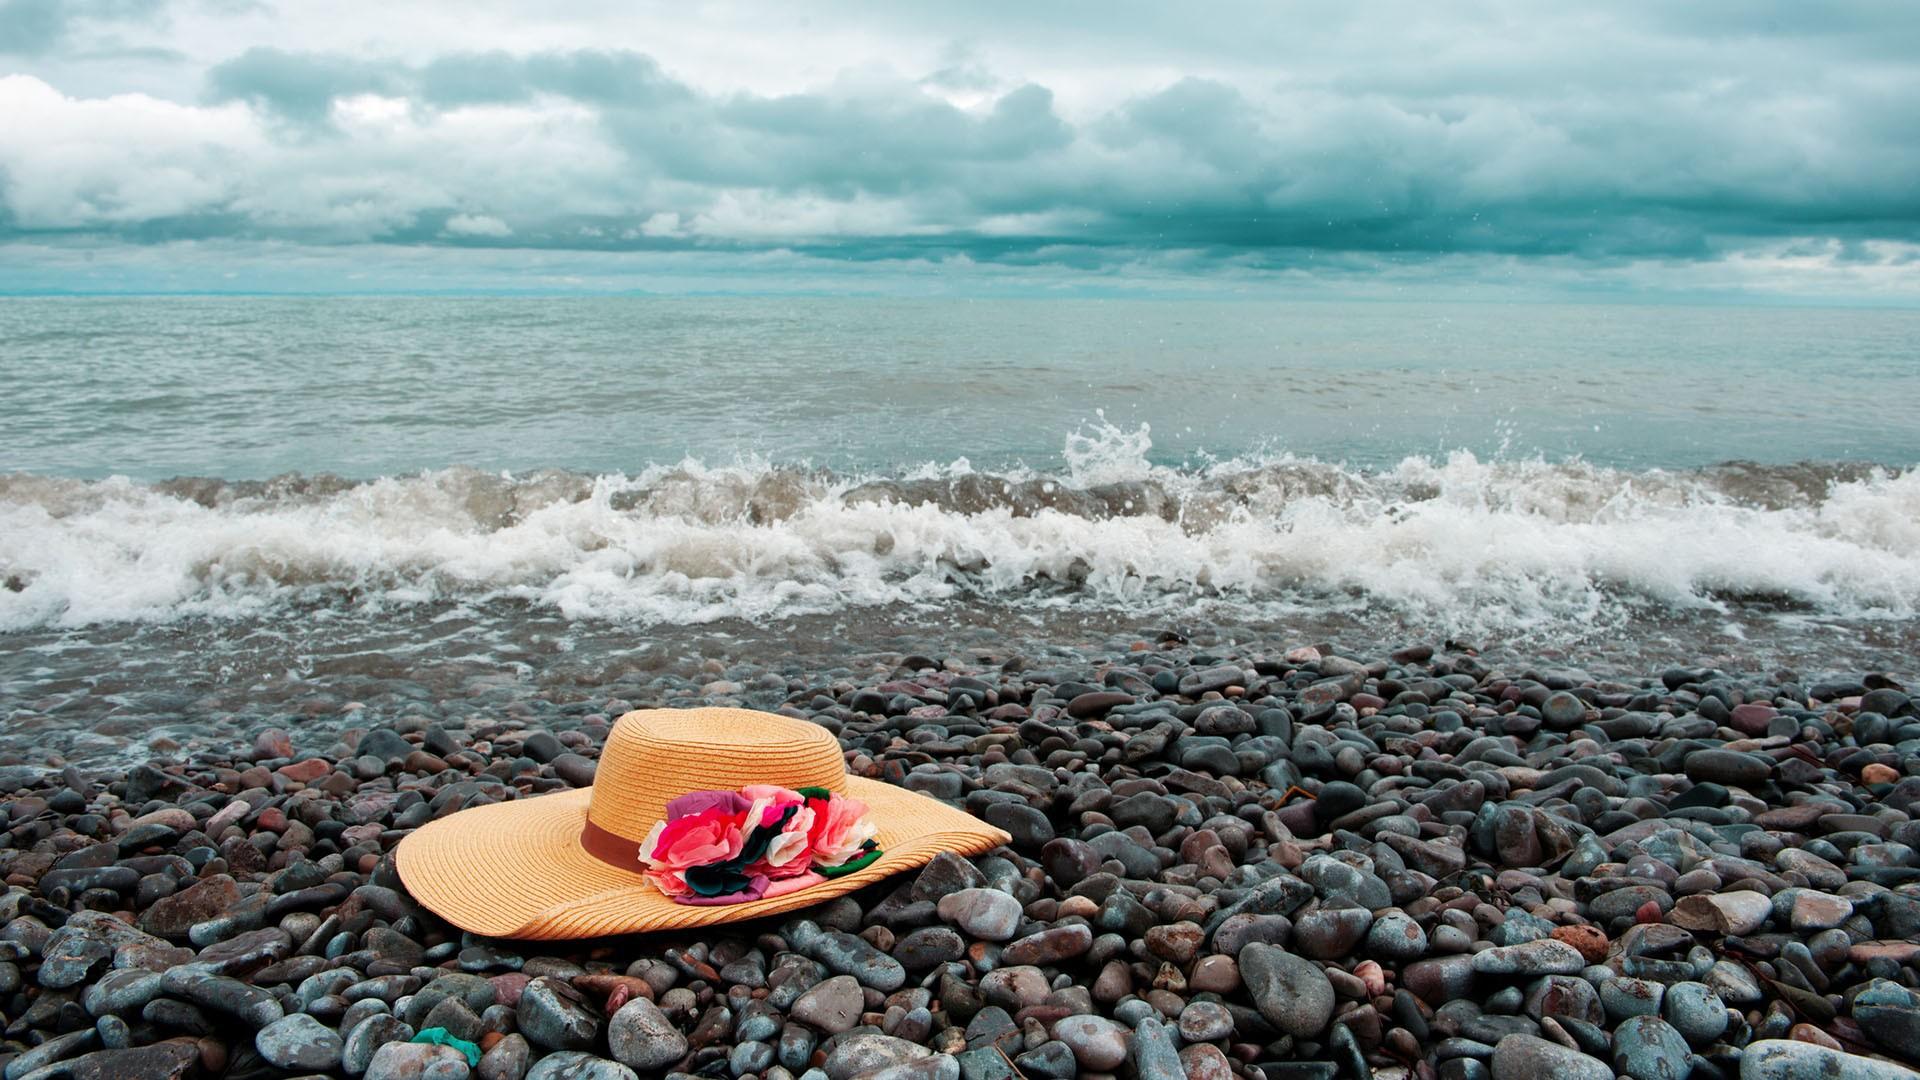 Hat on the beach wallpaper and image, picture, photo